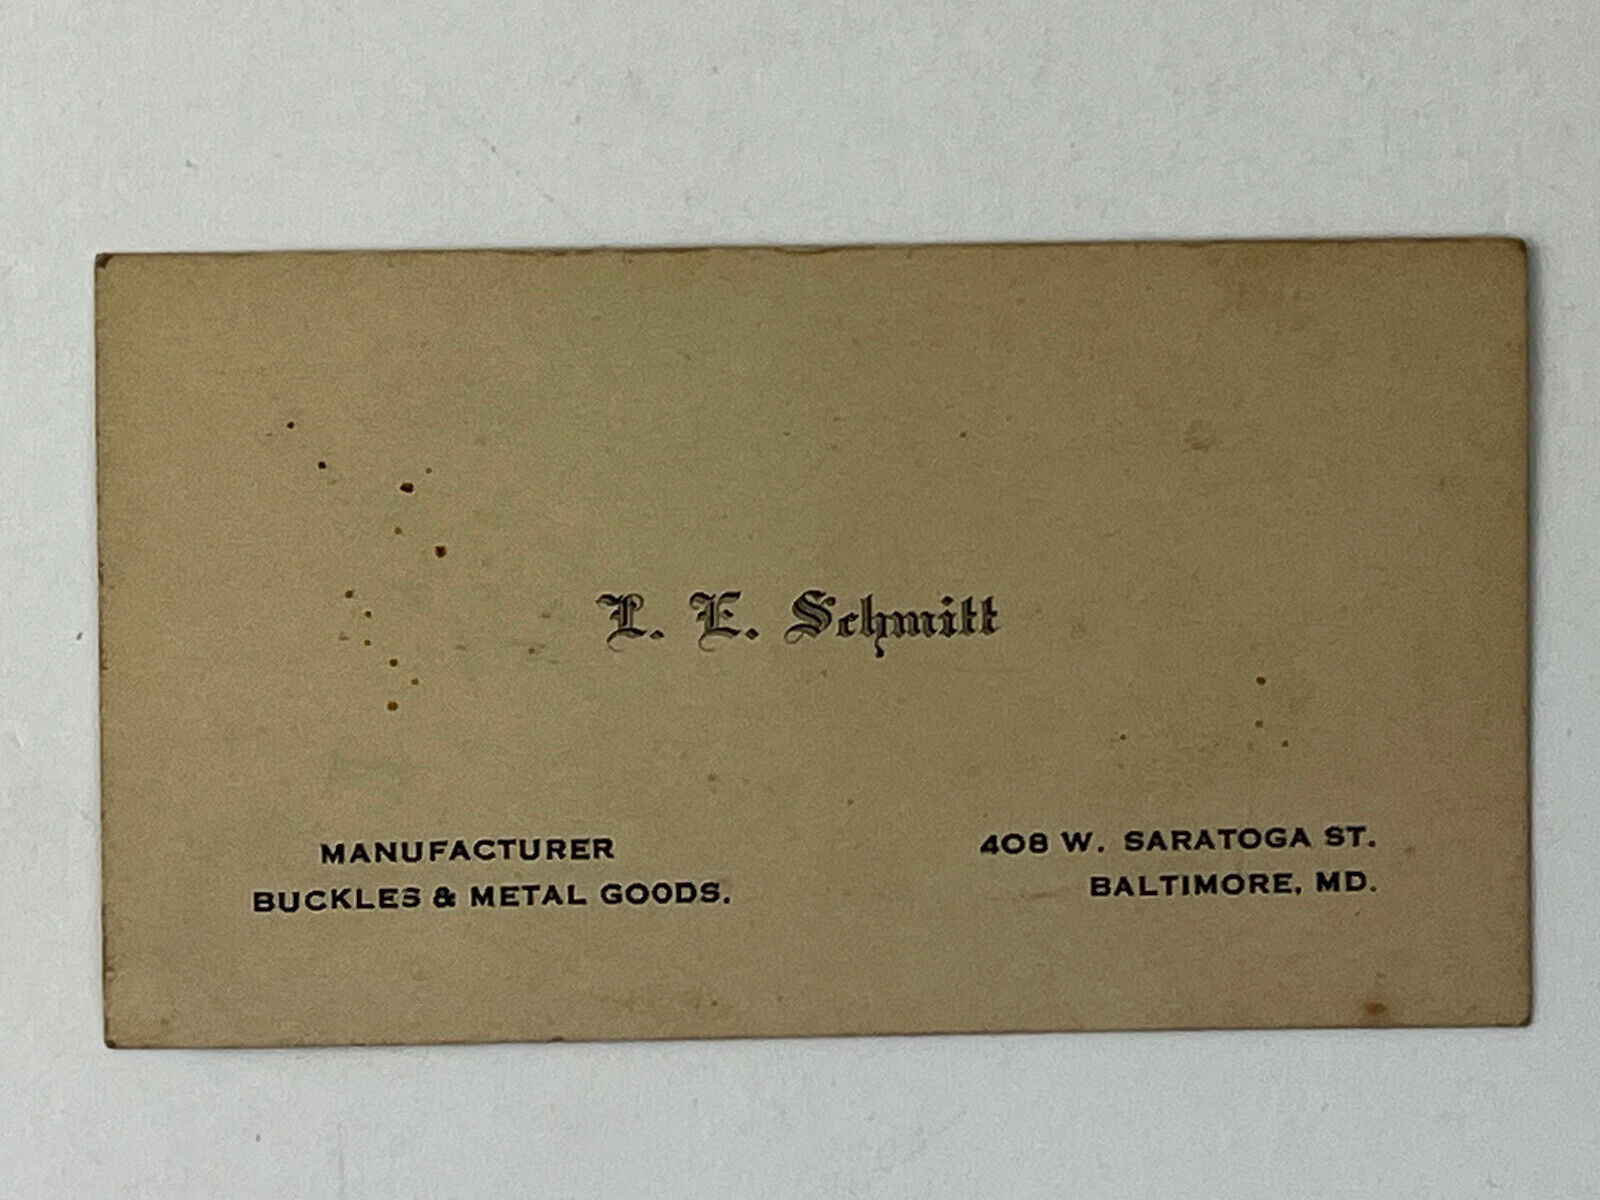 Antique L.e. Schmidt Business Card Baltimore Maryland Nice Card! 1 Day Ship!👍